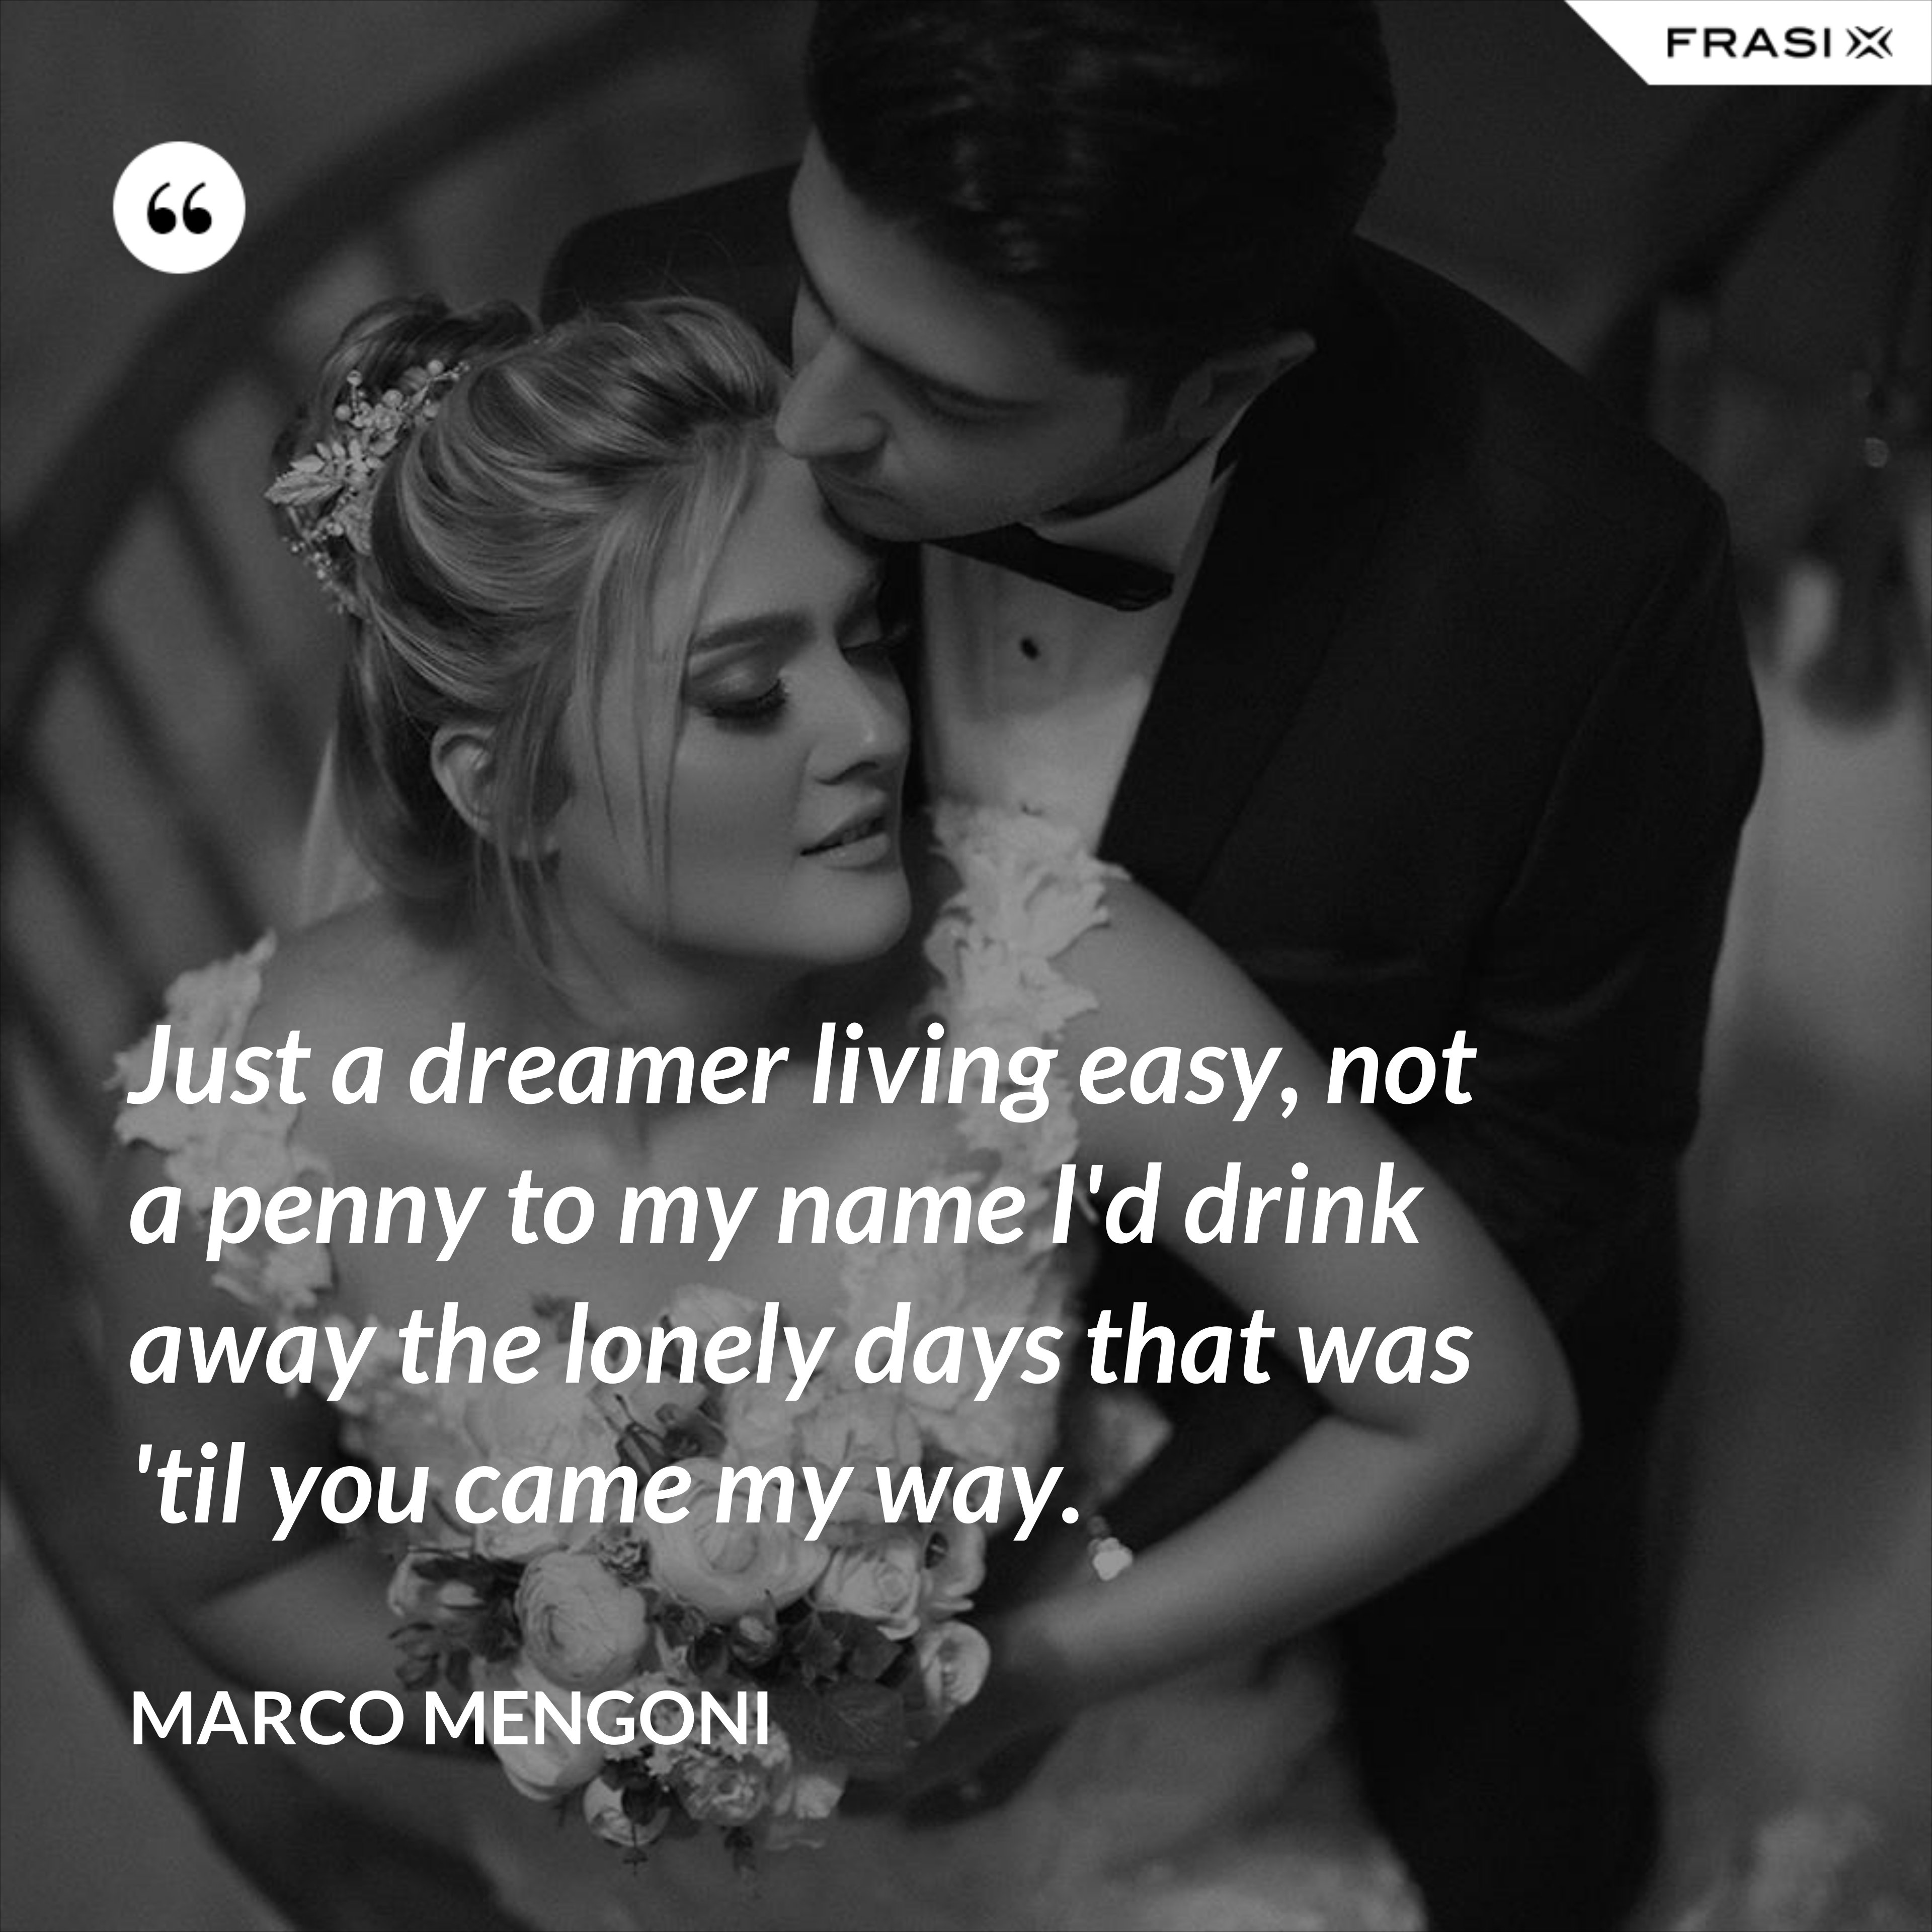 Just a dreamer living easy, not a penny to my name I'd drink away the lonely days that was 'til you came my way. - Marco Mengoni